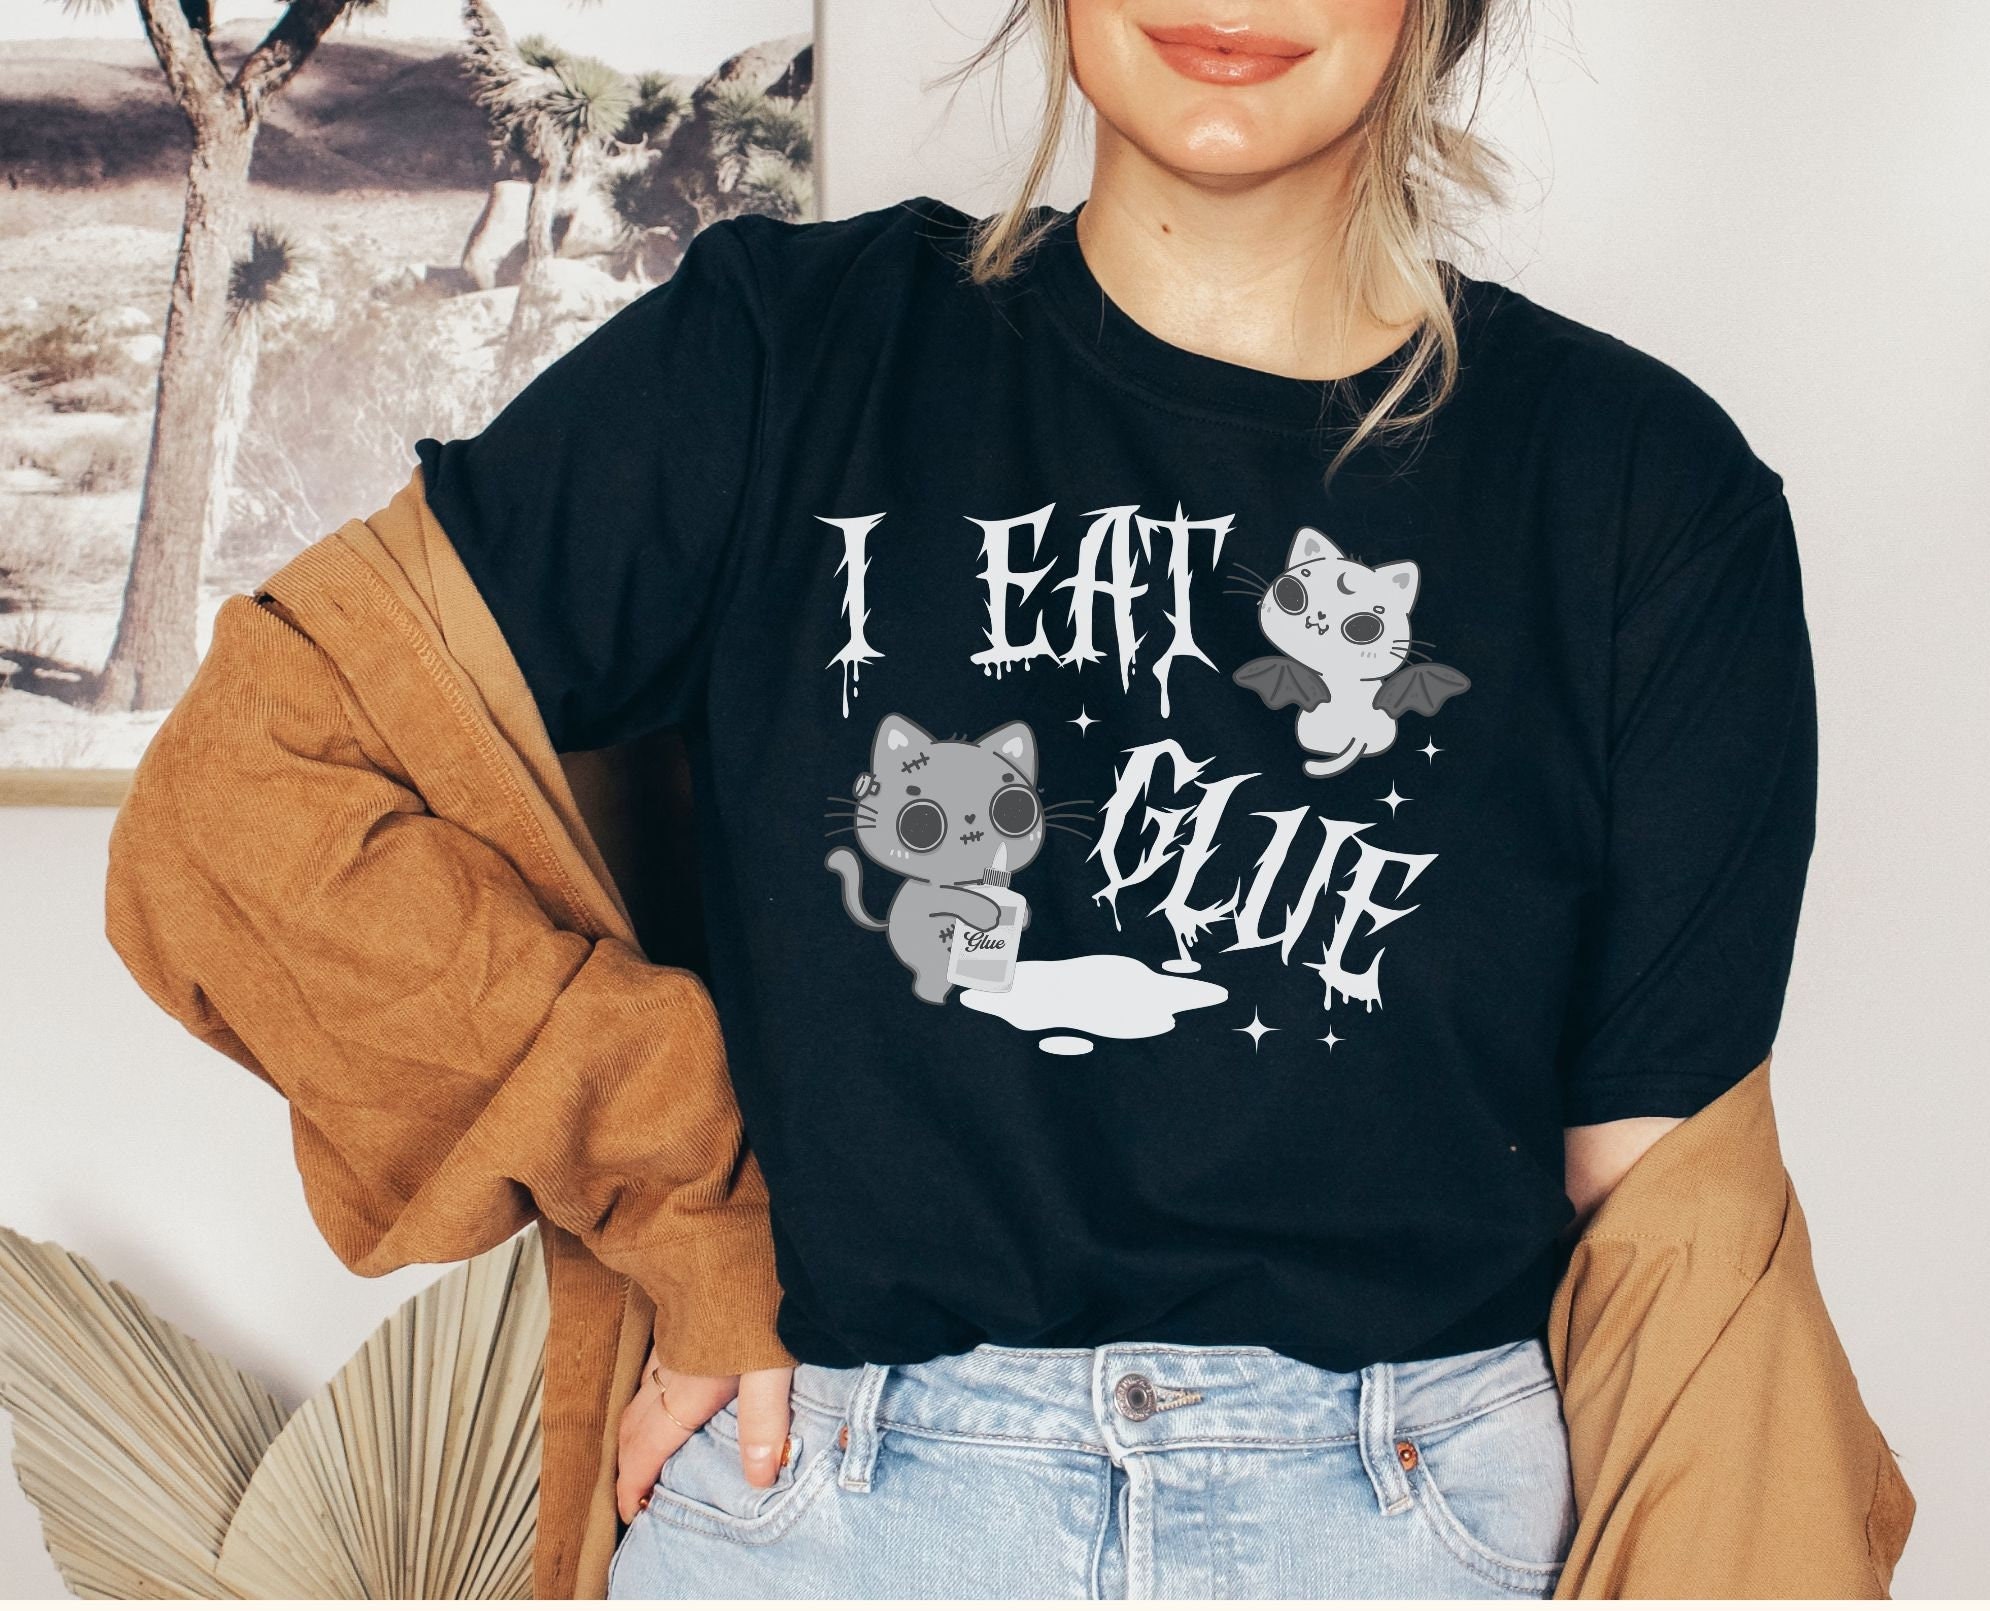 I Eat Glue - Removable Patch